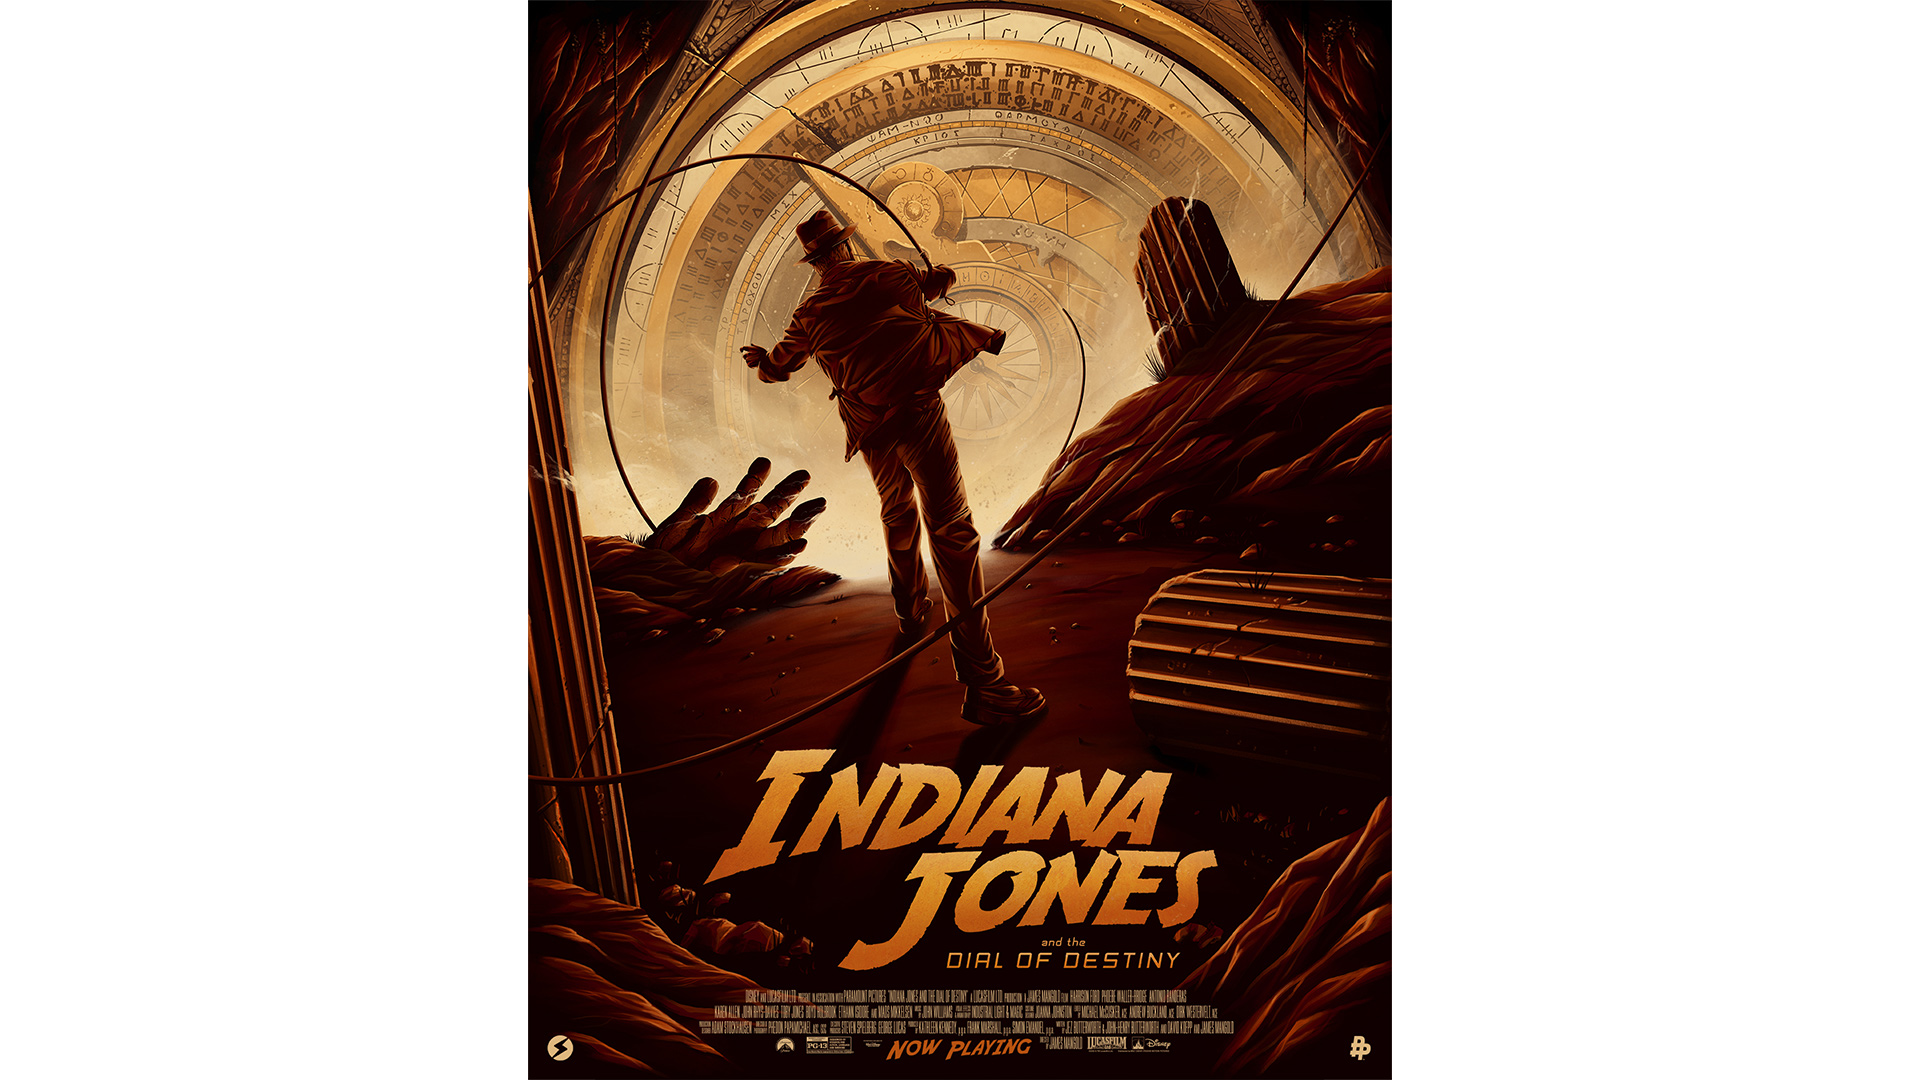 Art by inspired by Indiana Jones and the Dial of Destiny.